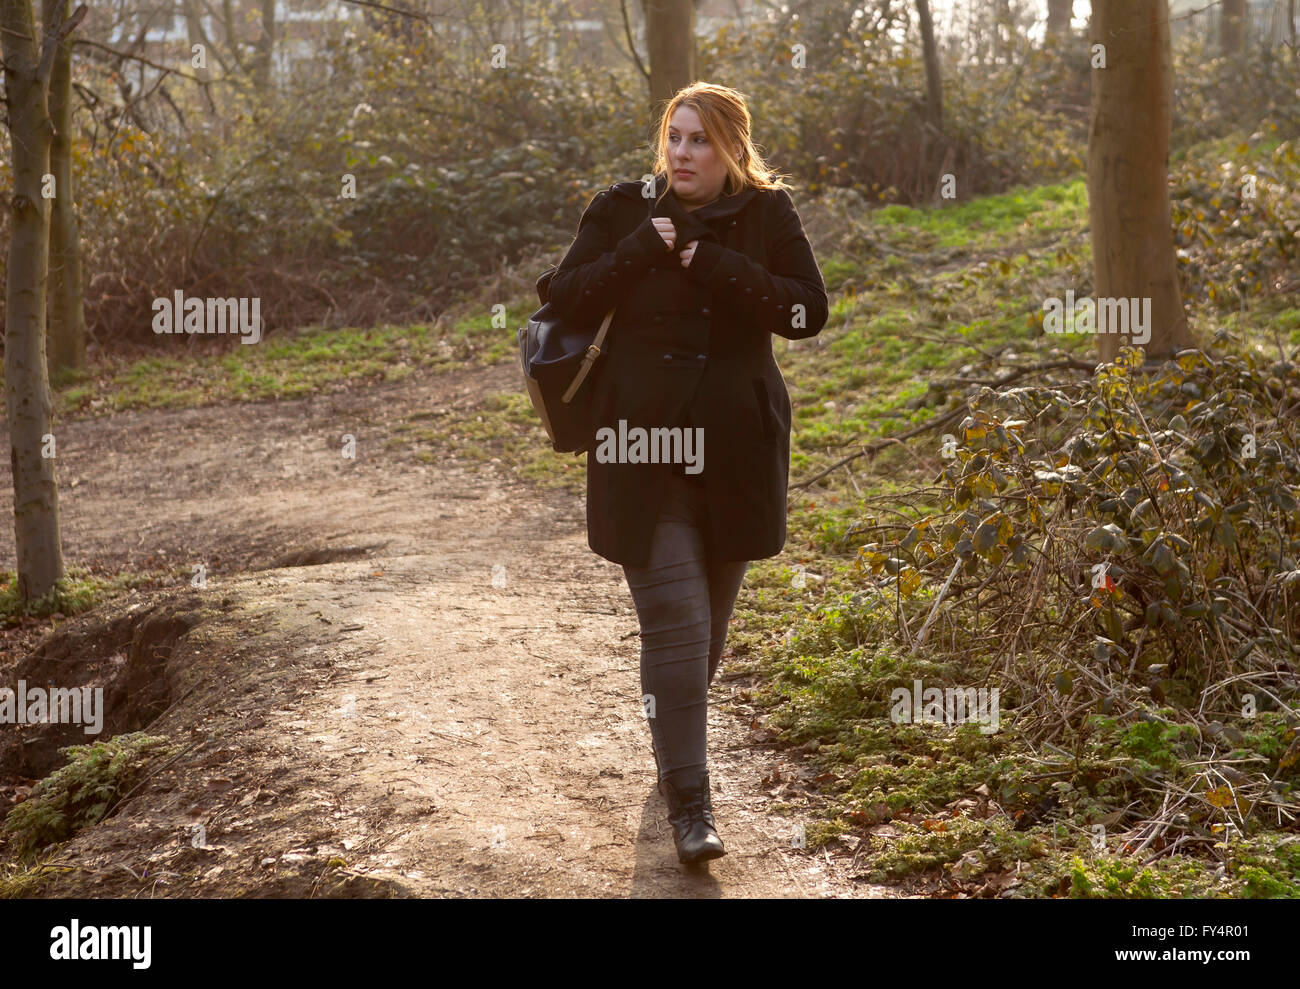 A woman is walking home through the park alone and she feels the fear that there could be someone behind her. Stock Photo